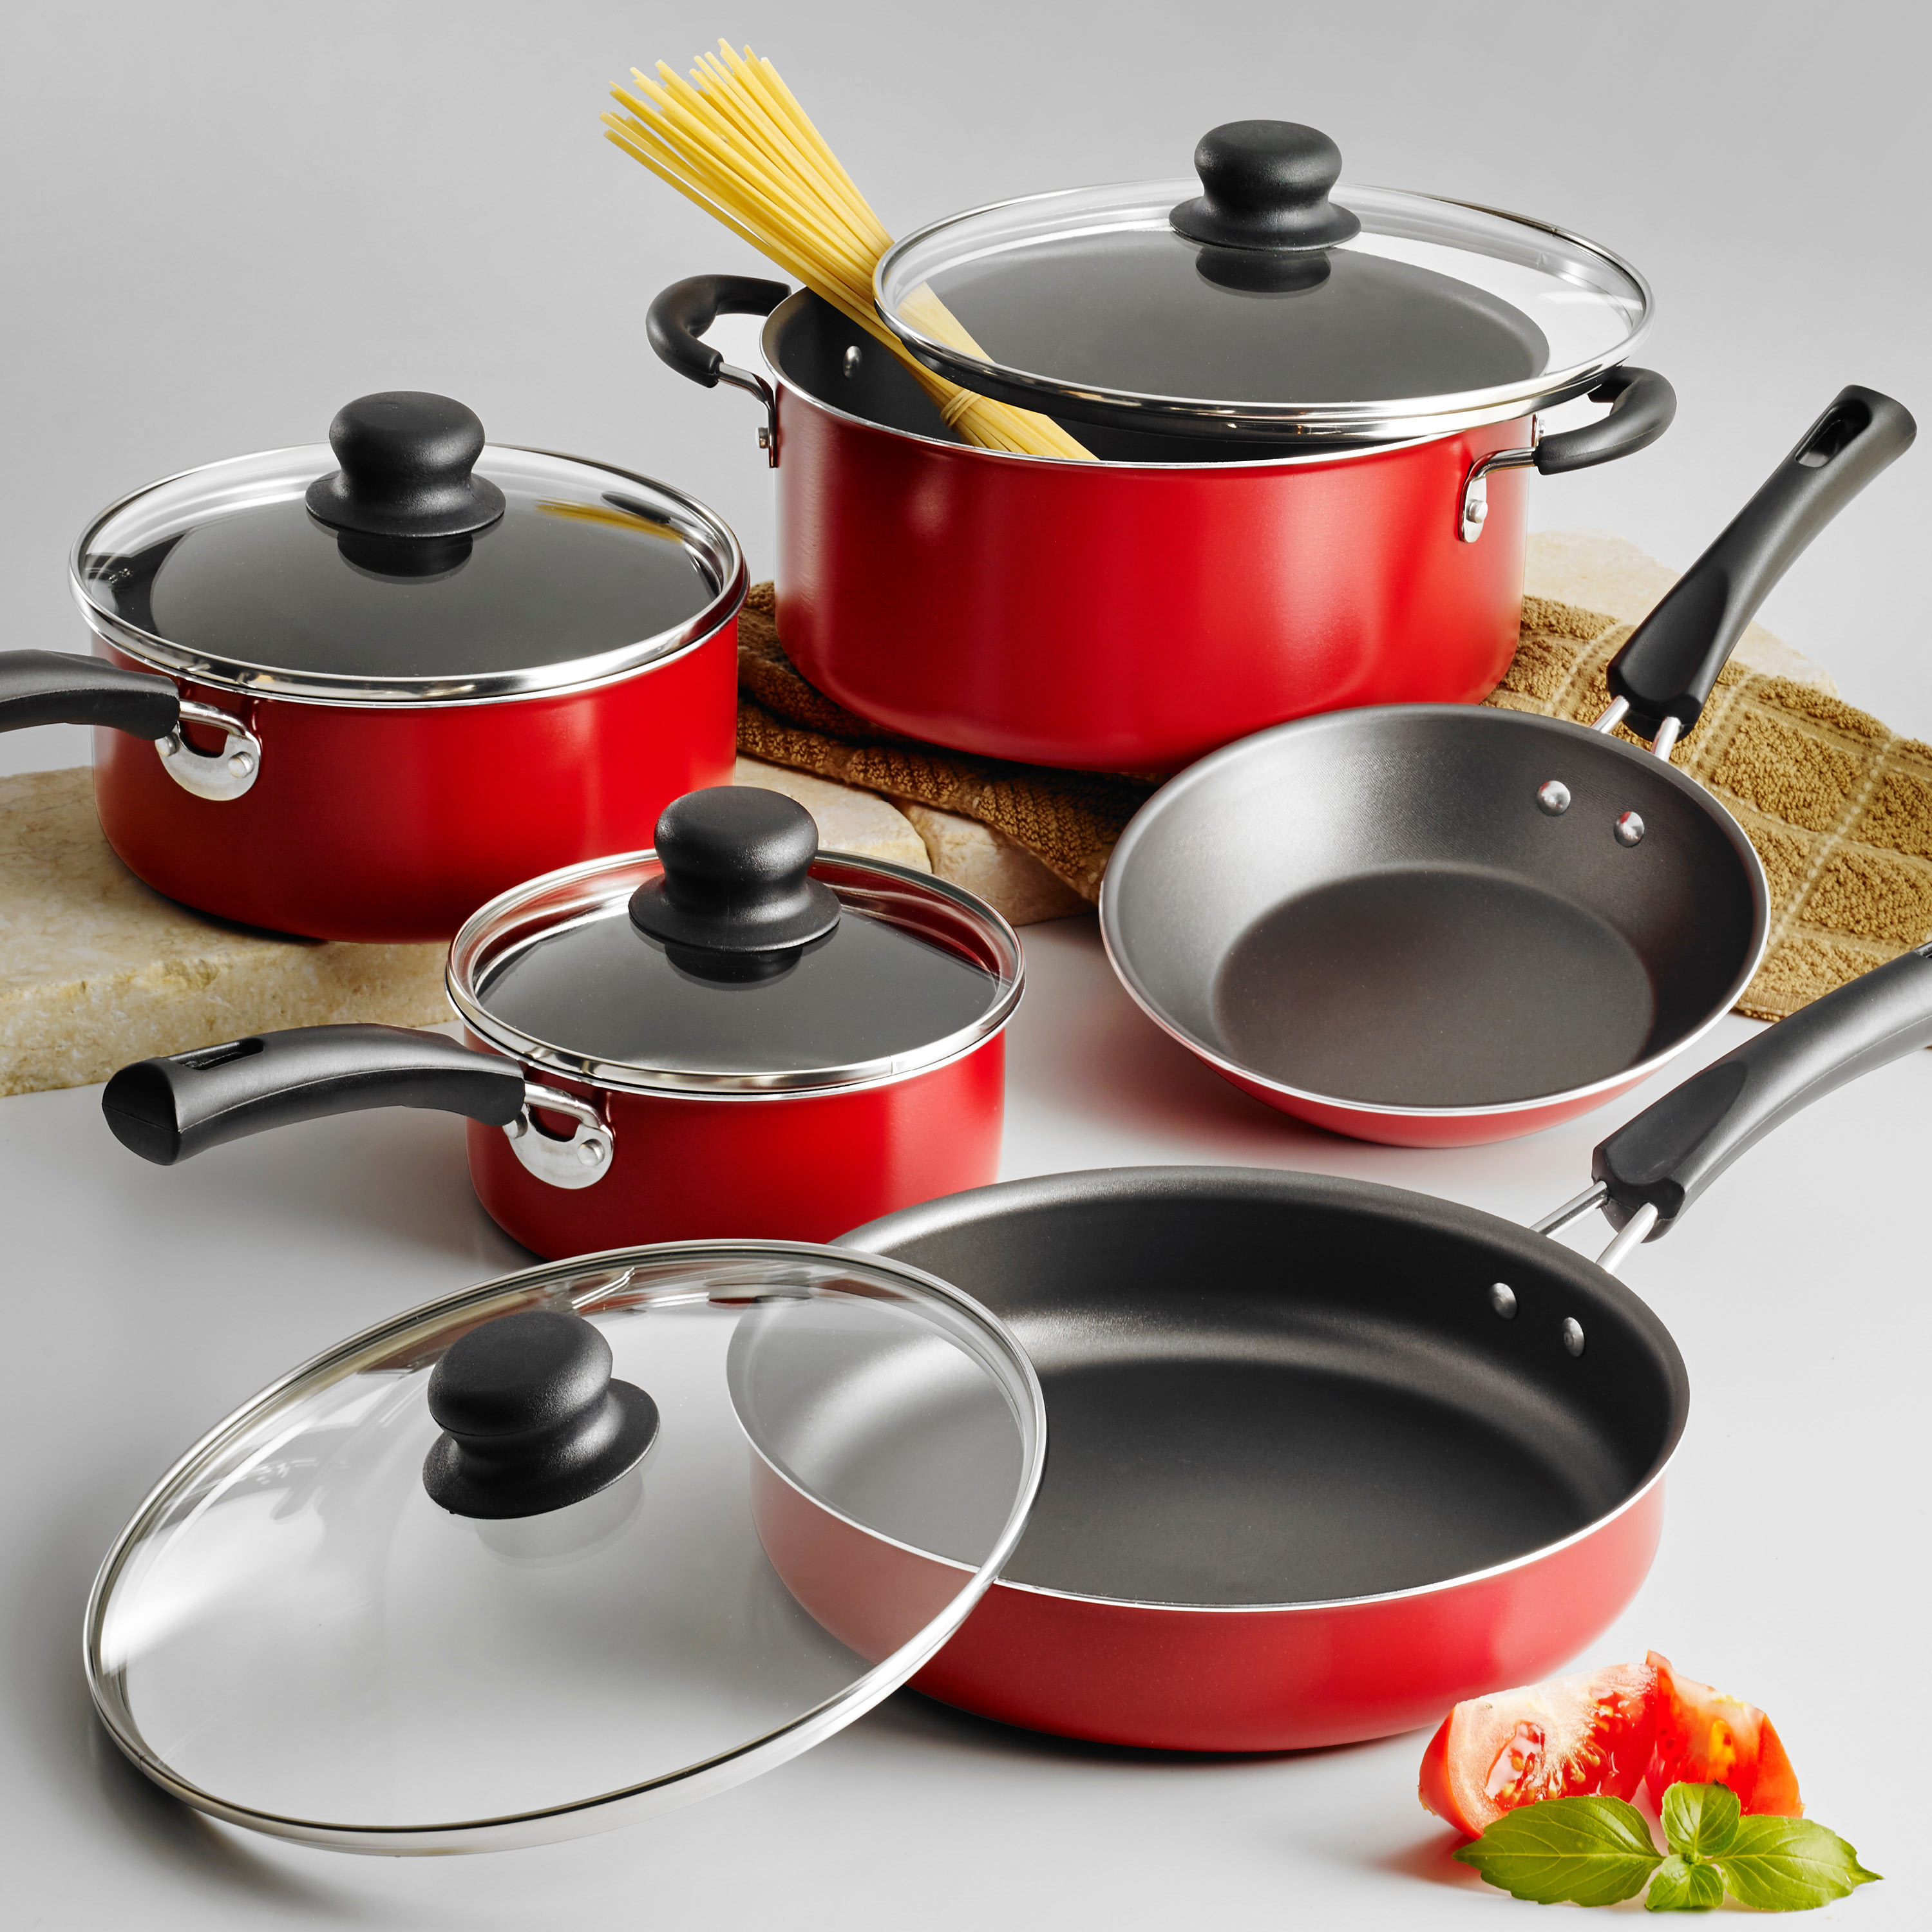 The red cookware set on a counter